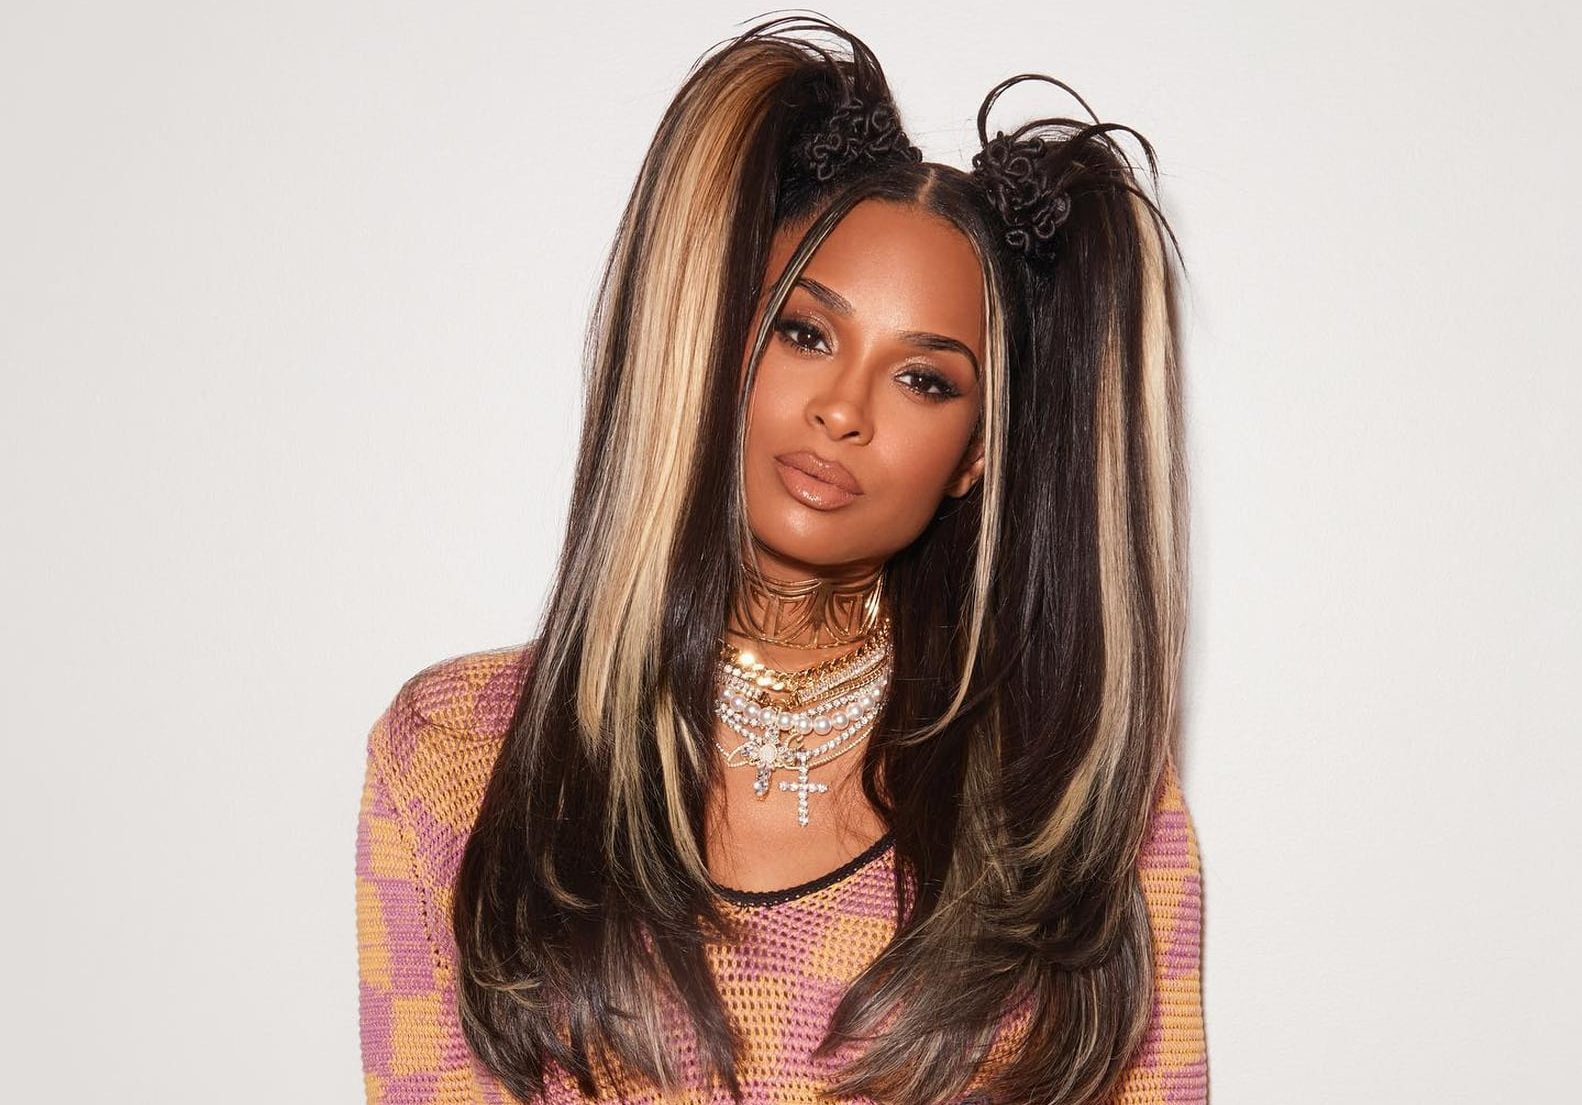 Ciara ‘Levels Up’ With New ‘Bebe’ Capsule Collection